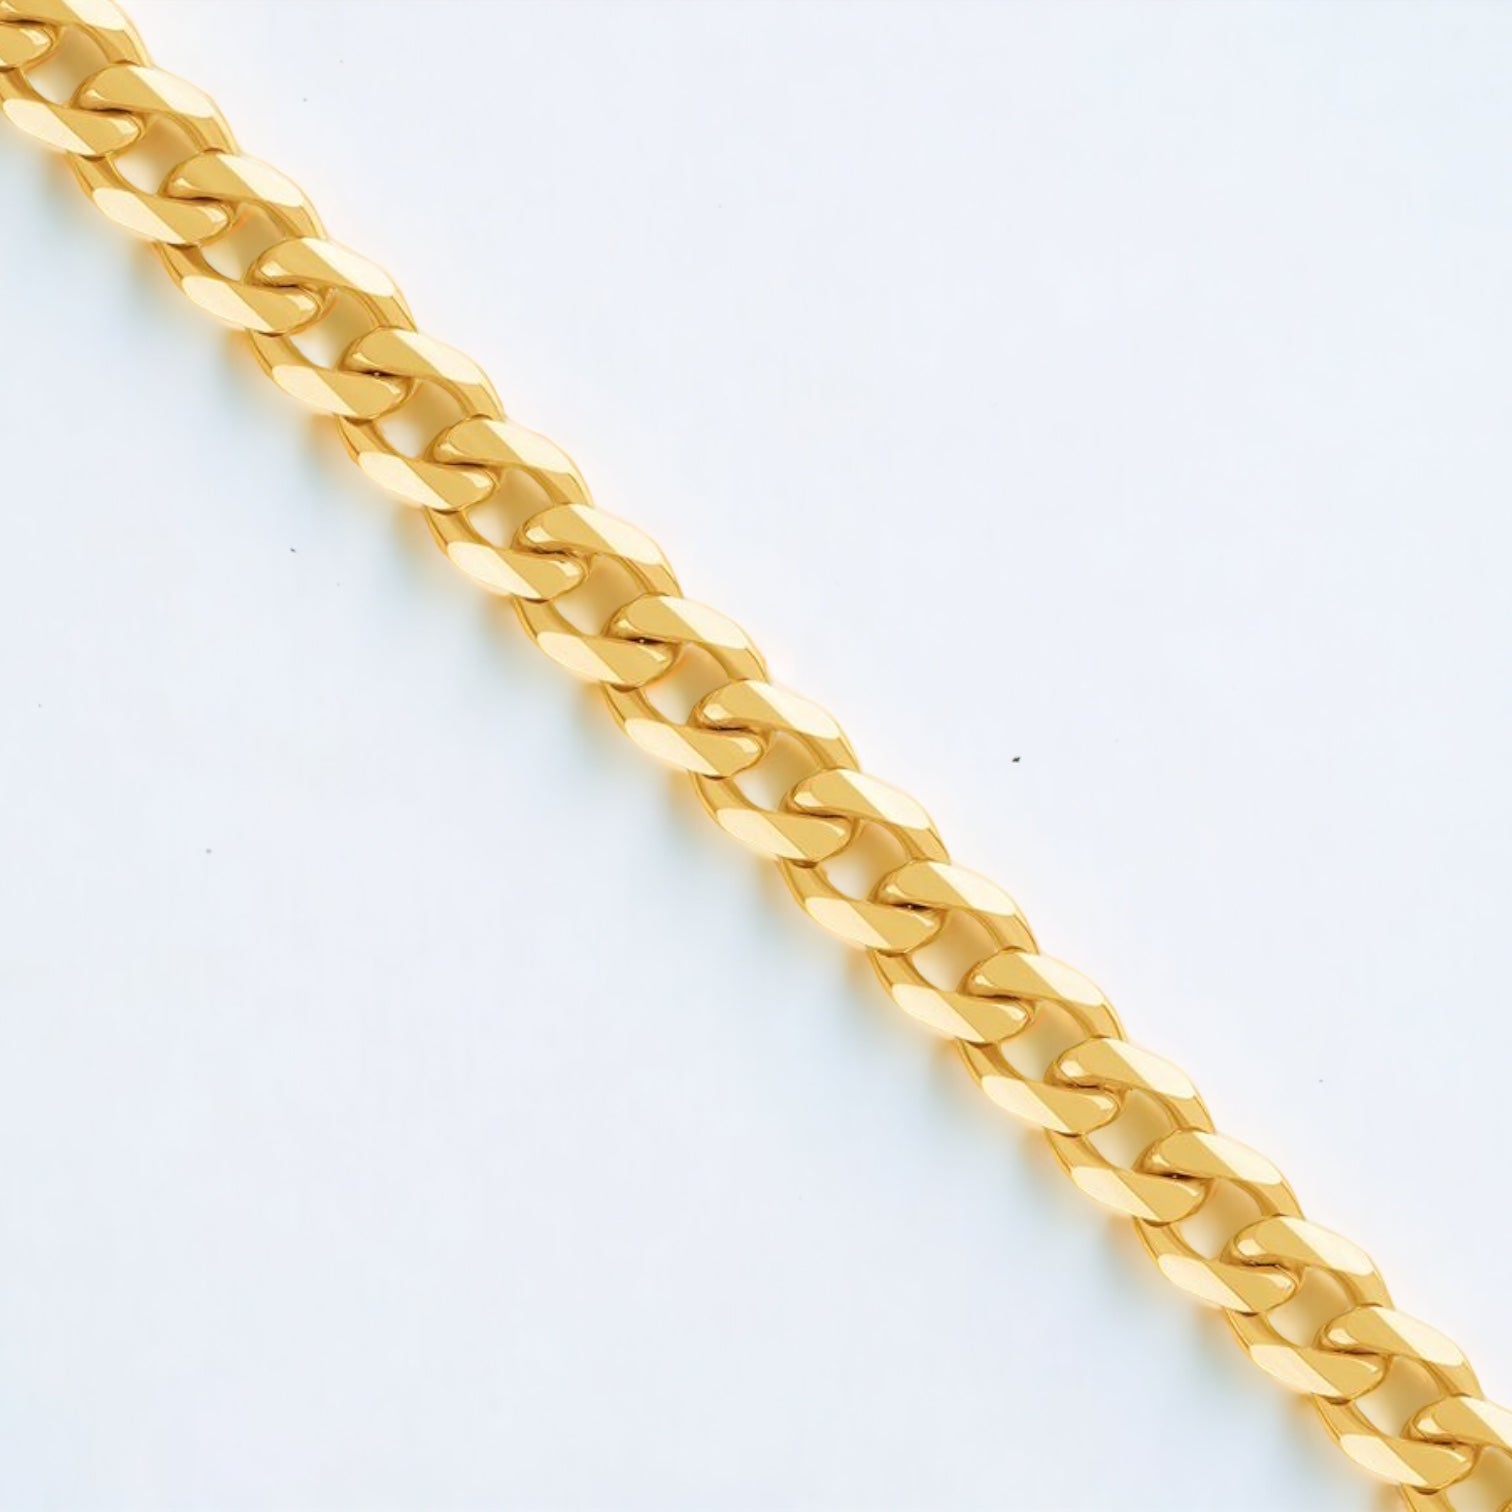 3.8mm 9ct solid Gold Curb Link Chain | 16" - 24"